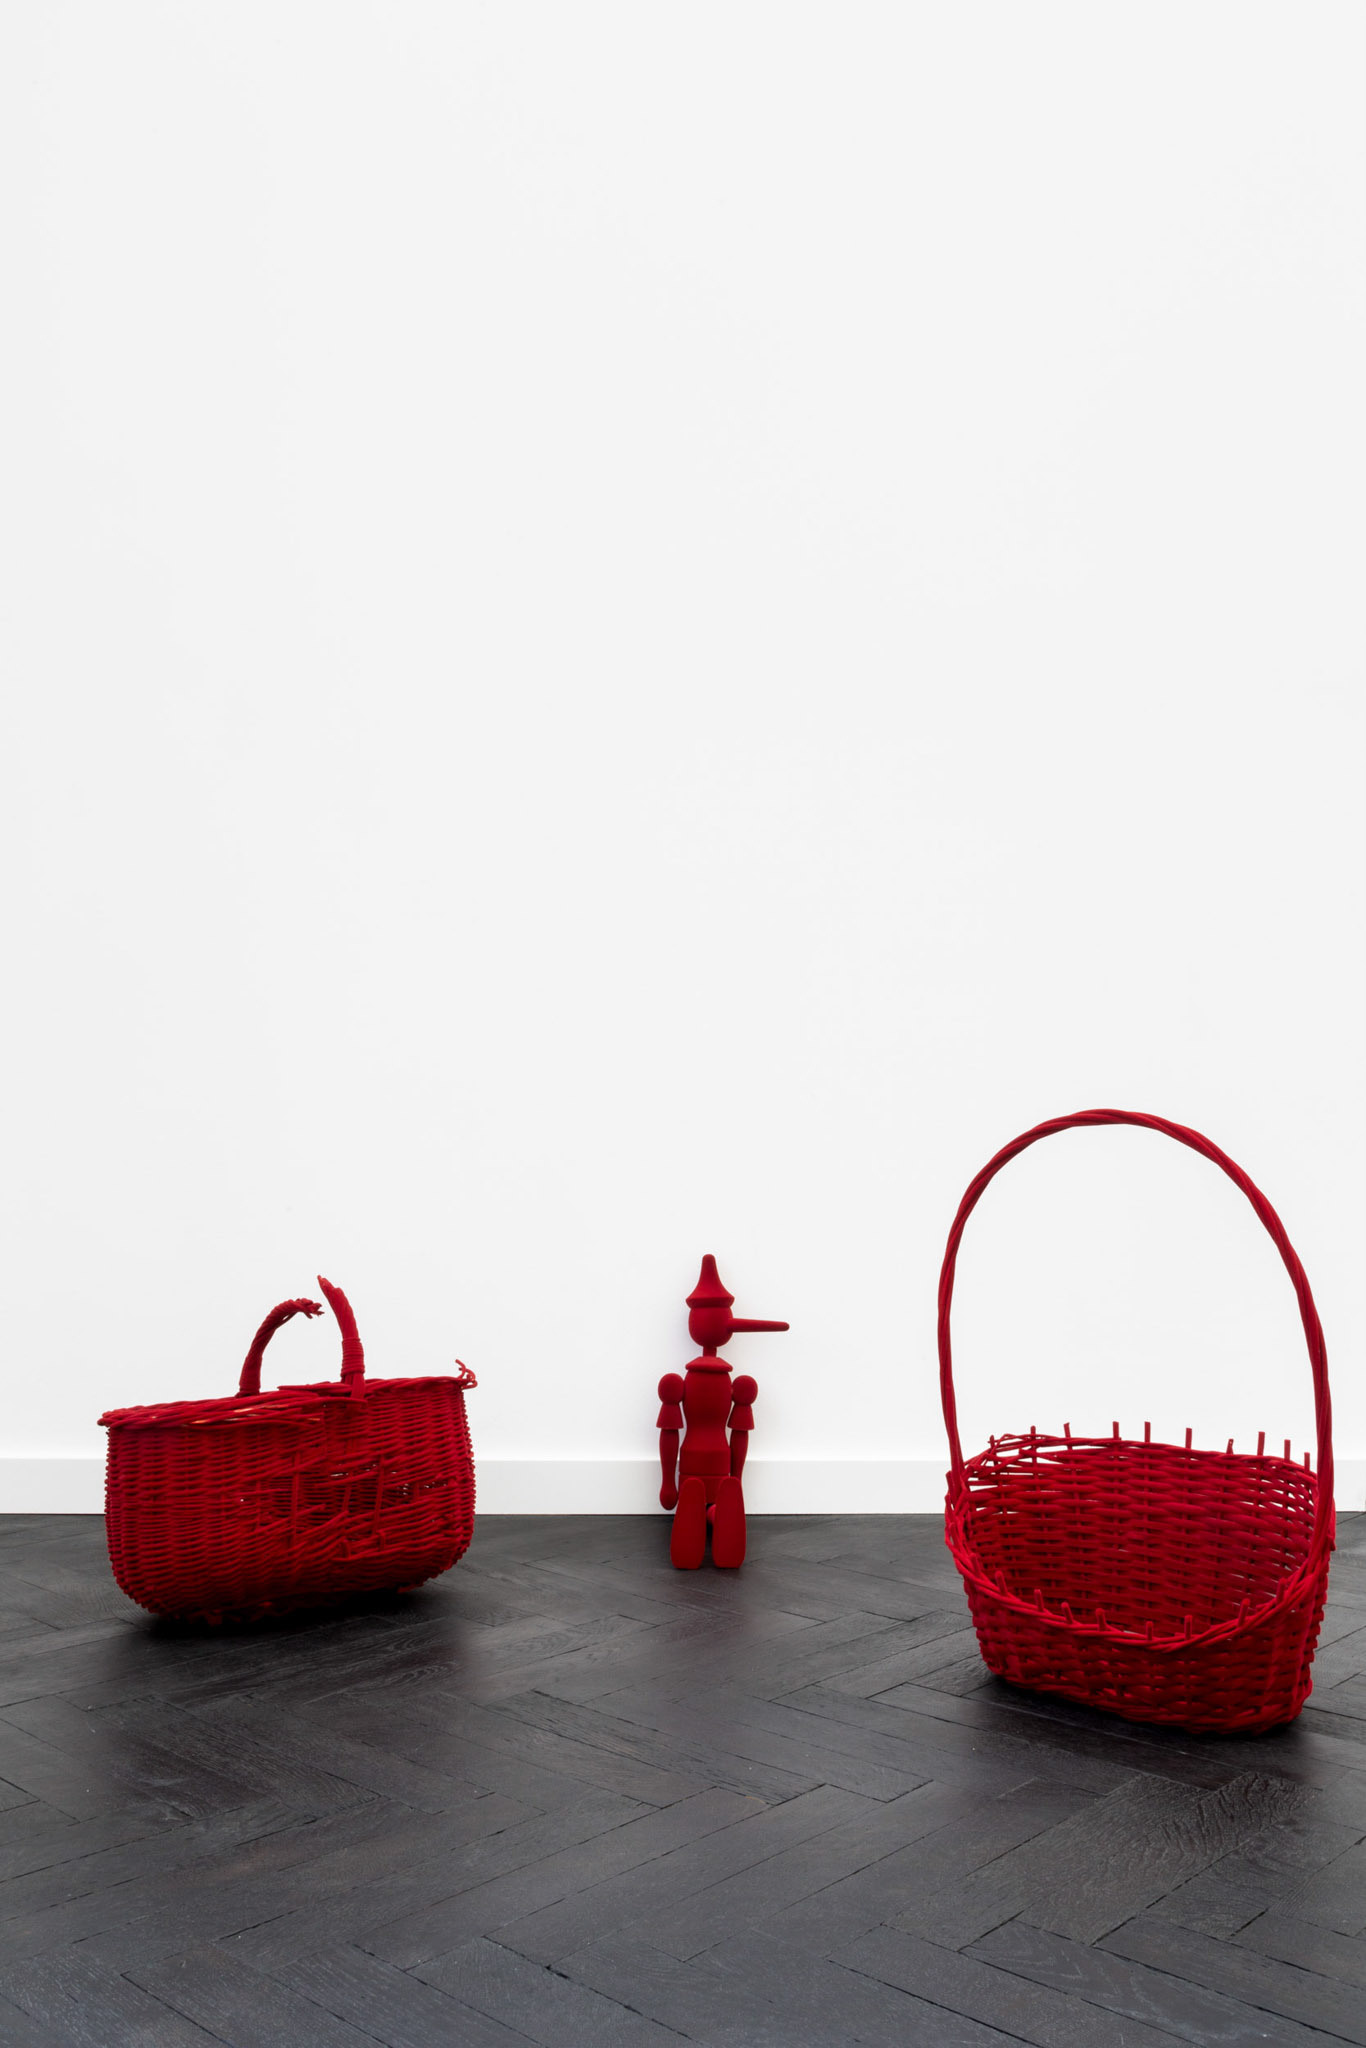 Hannah Sophie Dunkelberg, Untitled, 2023, wooden Pinocchio, wicker basket, synthetic fibers. Courtesy the artist and Gunia Nowik Gallery